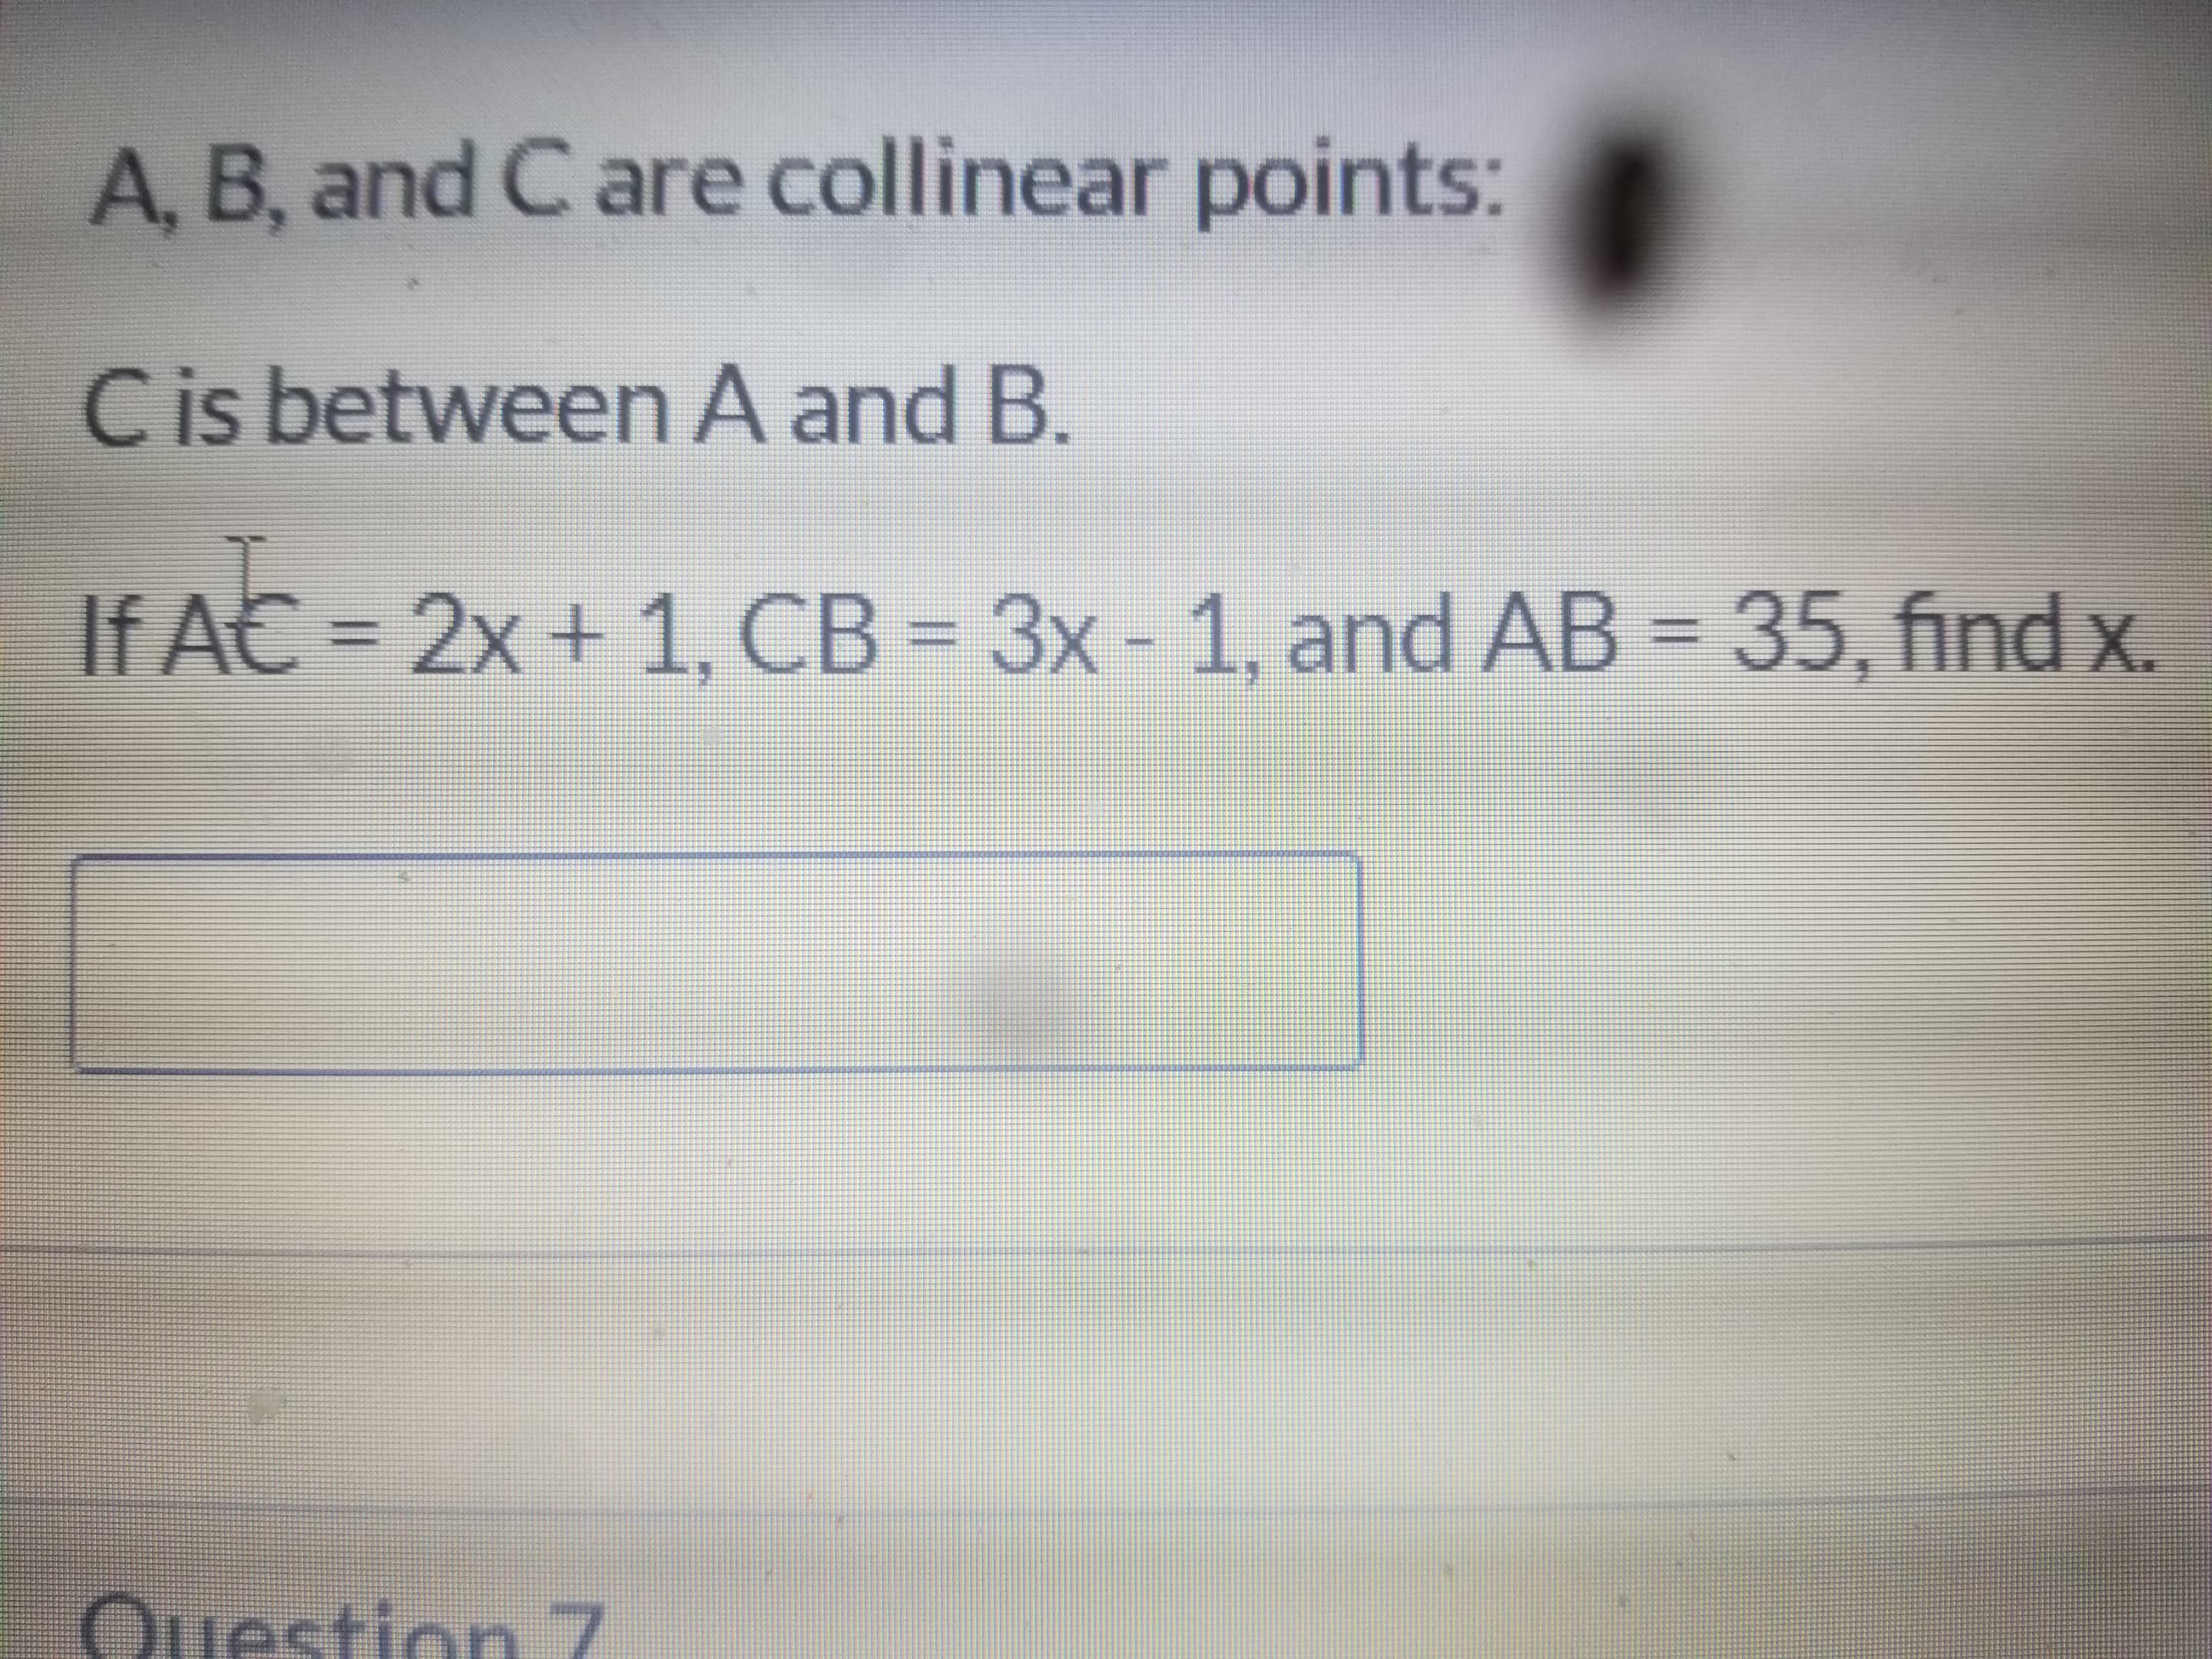 A, B, and C are collinear points:
Cis between A and B.
If AC = 2x + 1, CB = 3x - 1, and AB = 35, find x.
